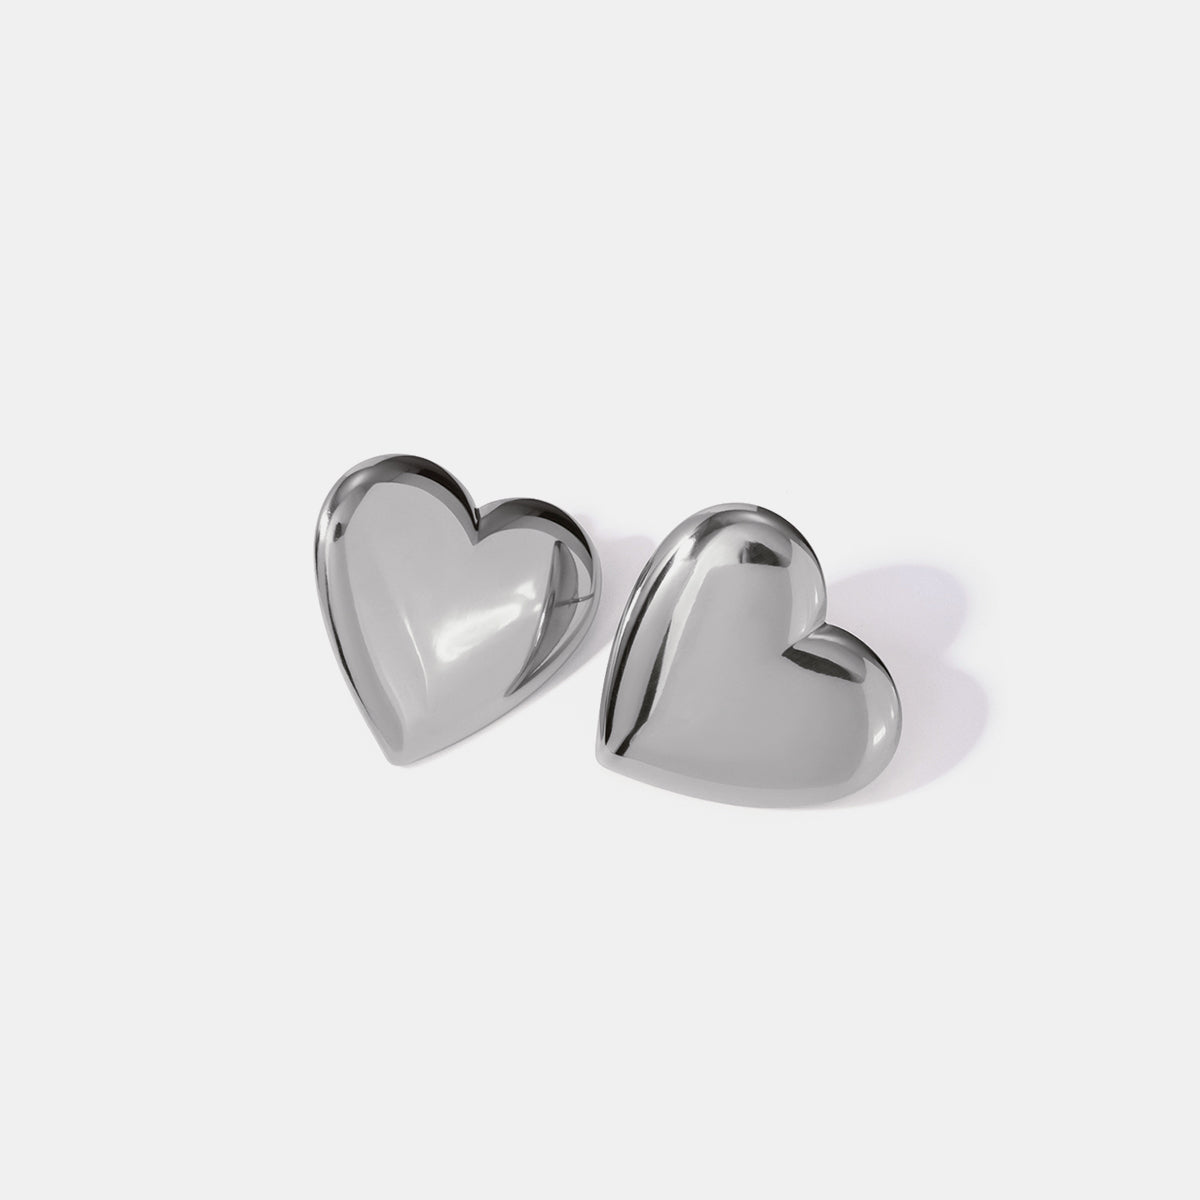 1# BEST Silver Heart Stud Earrings Jewelry Gift for Women | #1 Best Most Top Trendy Trending Aesthetic Silver Earrings Jewelry Gift for Women, Girls, Girlfriend, Mother, Wife, Ladies | Mason & Madison Co.